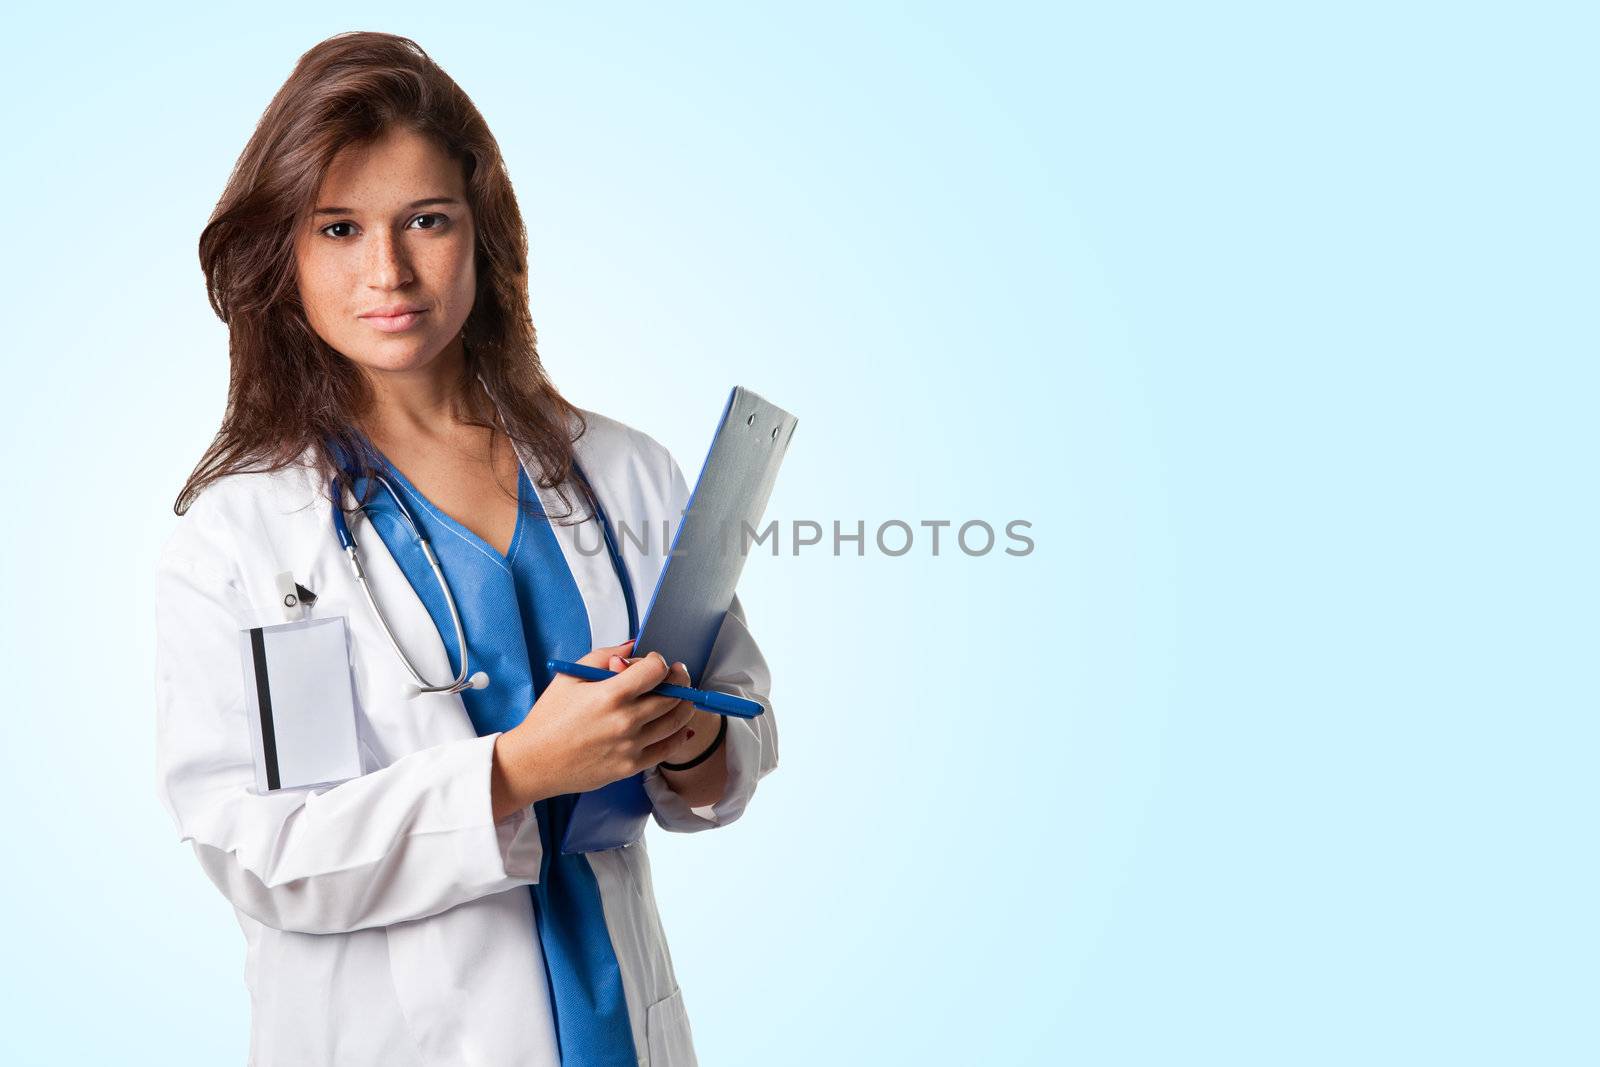 Young female doctor with scrubs and a stethoscope holding a notepad